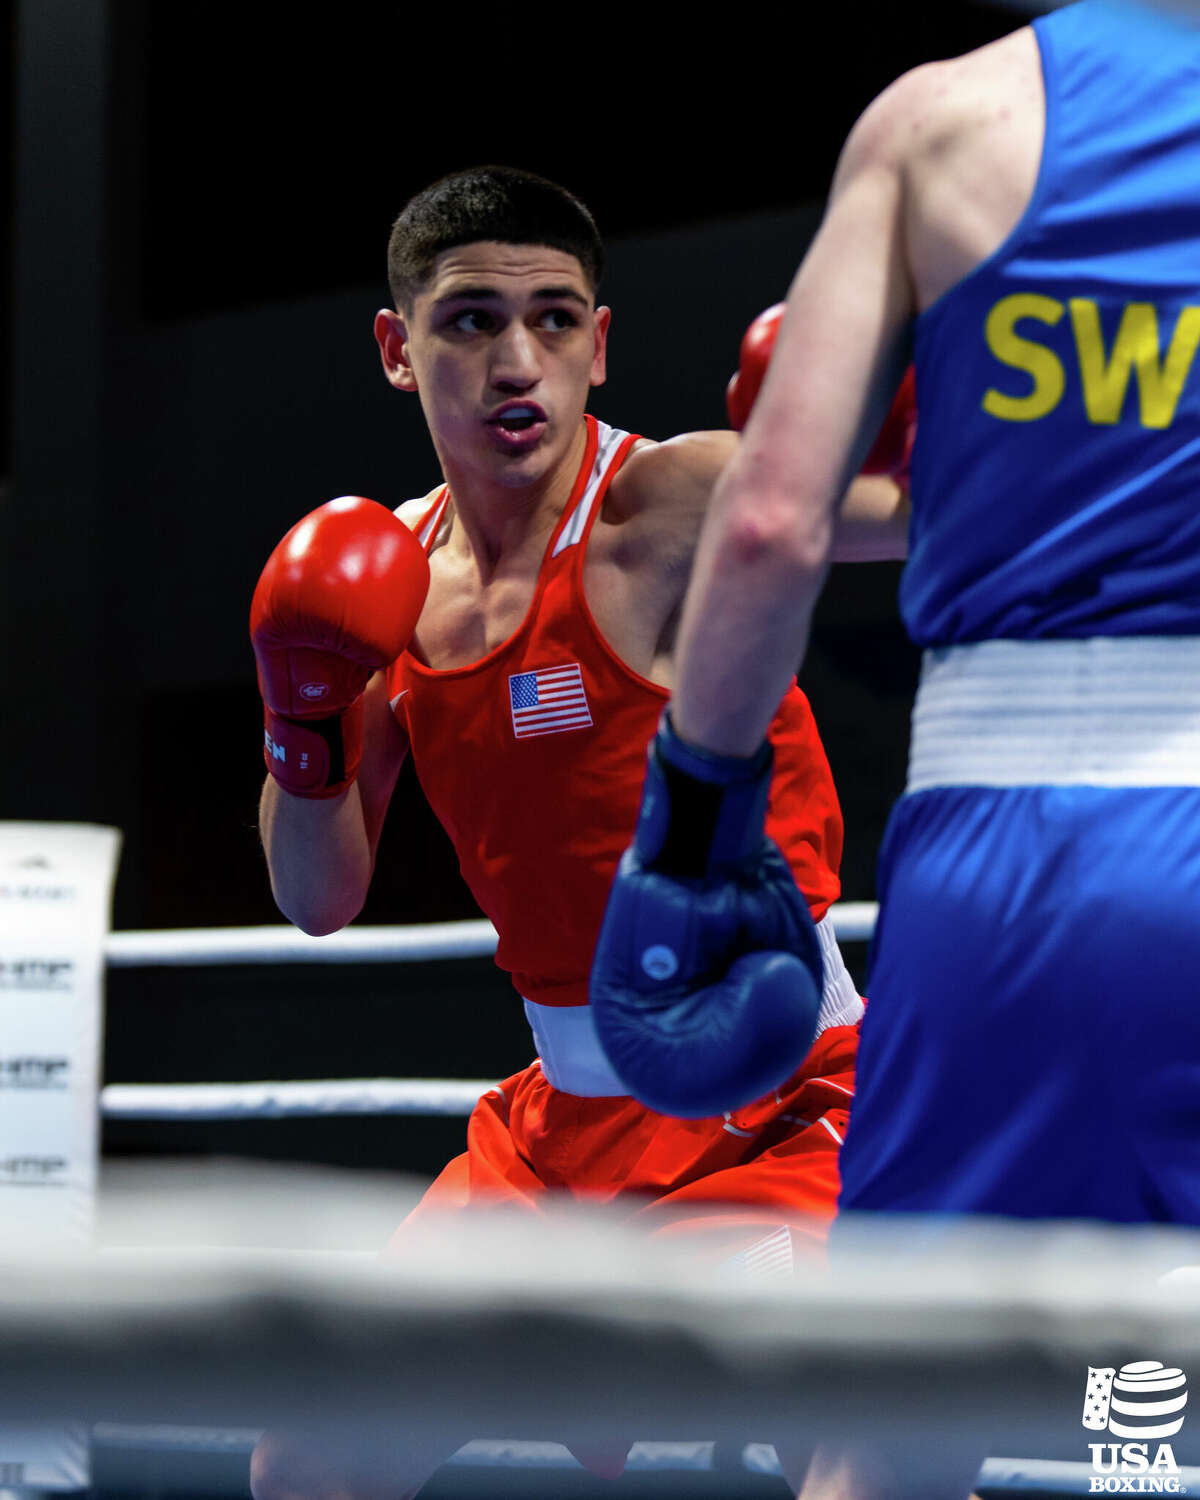 Emilio Garcia and the USA Boxing High Performance Team begin competing in the 53rd Grand Prix in Usti and Labem, Czech Republic on Thursday, May 4.